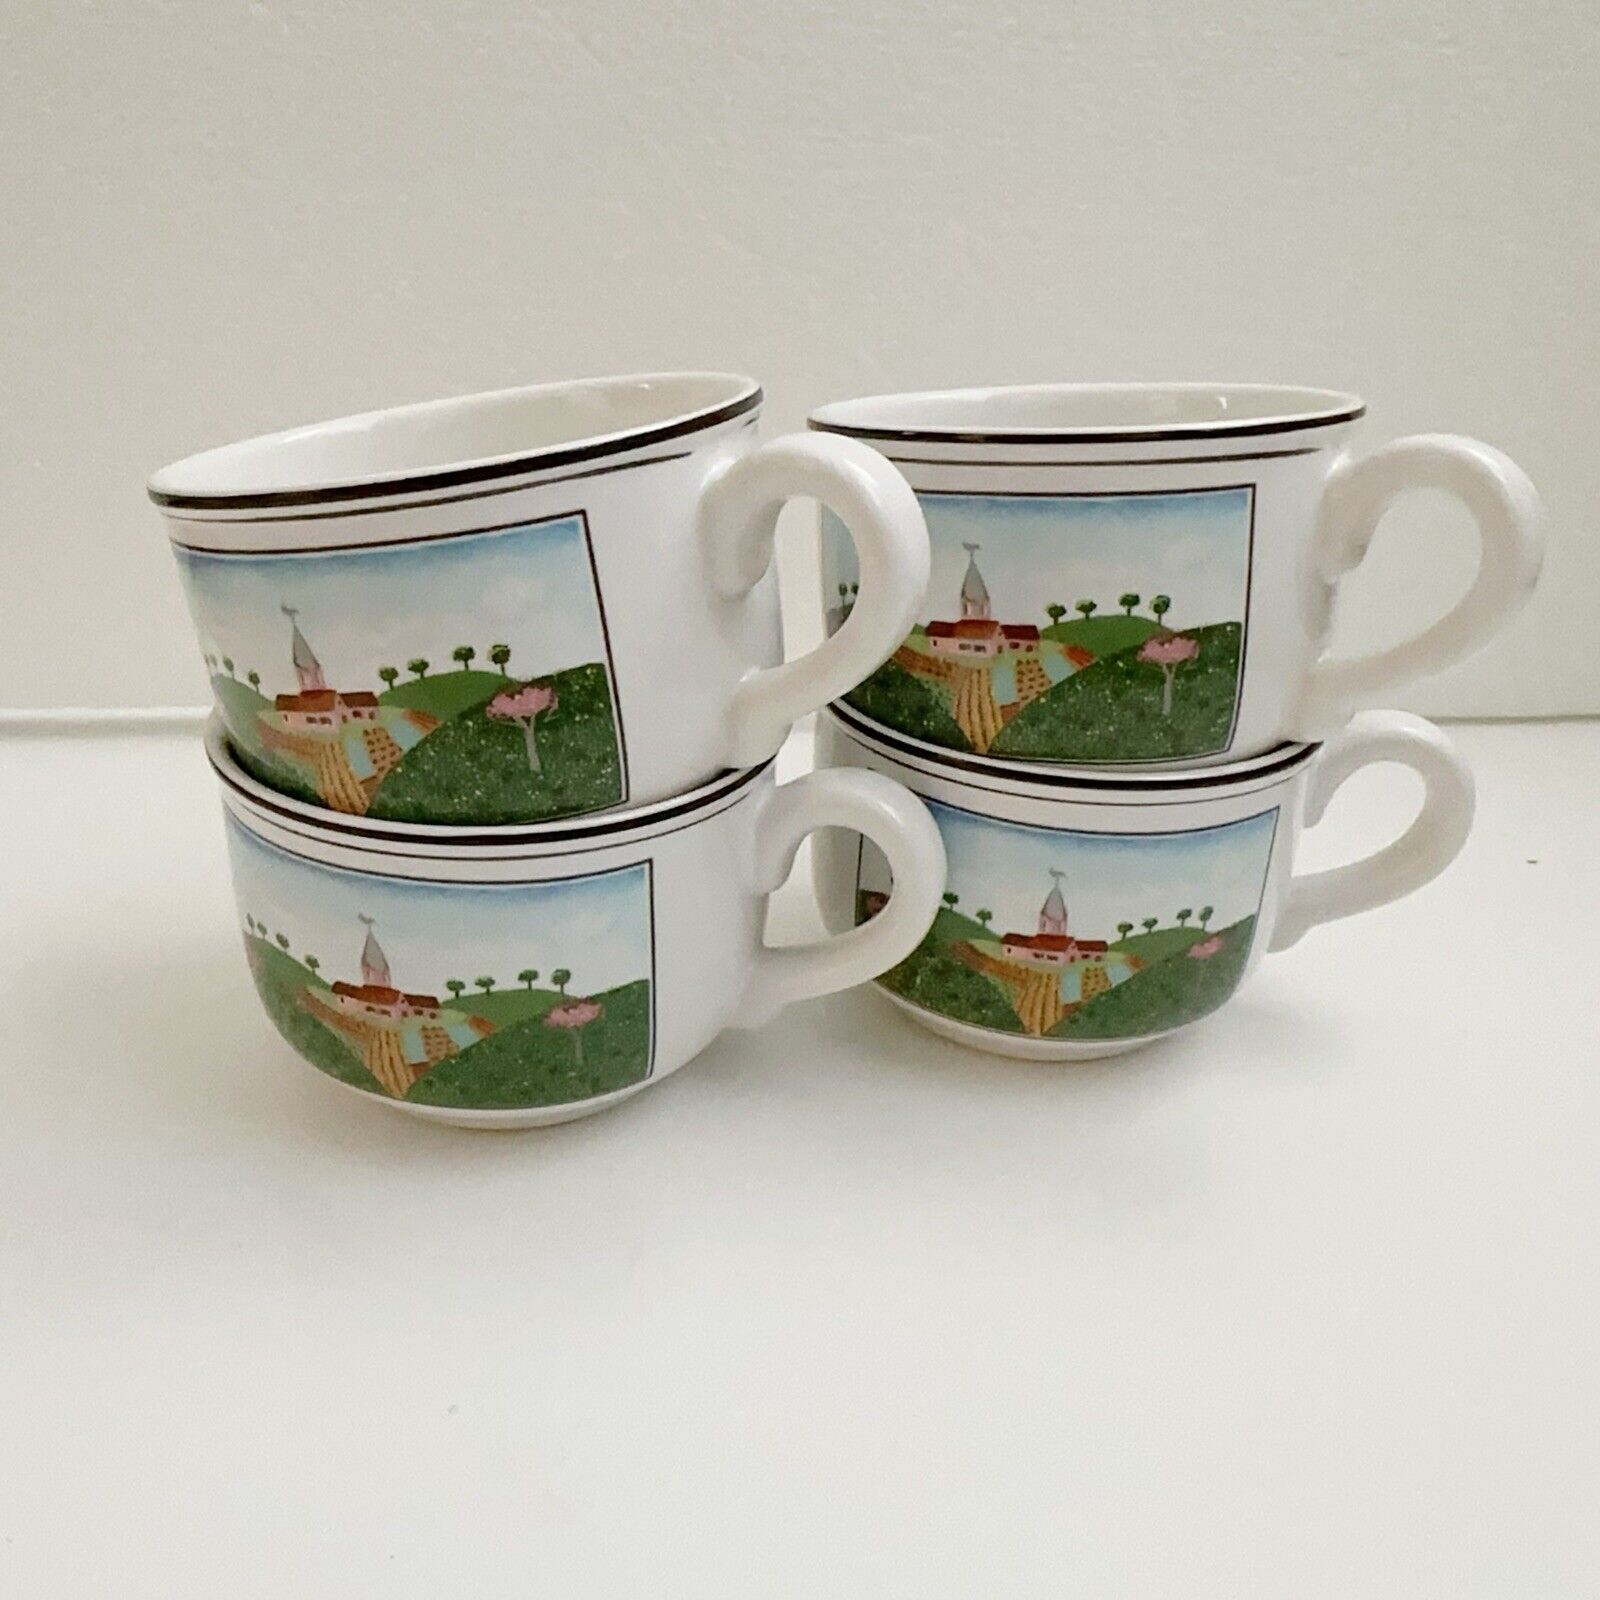 Lot of 4 Villeroy & Boch NAIF Coffee Cups Farm Scene and Duck